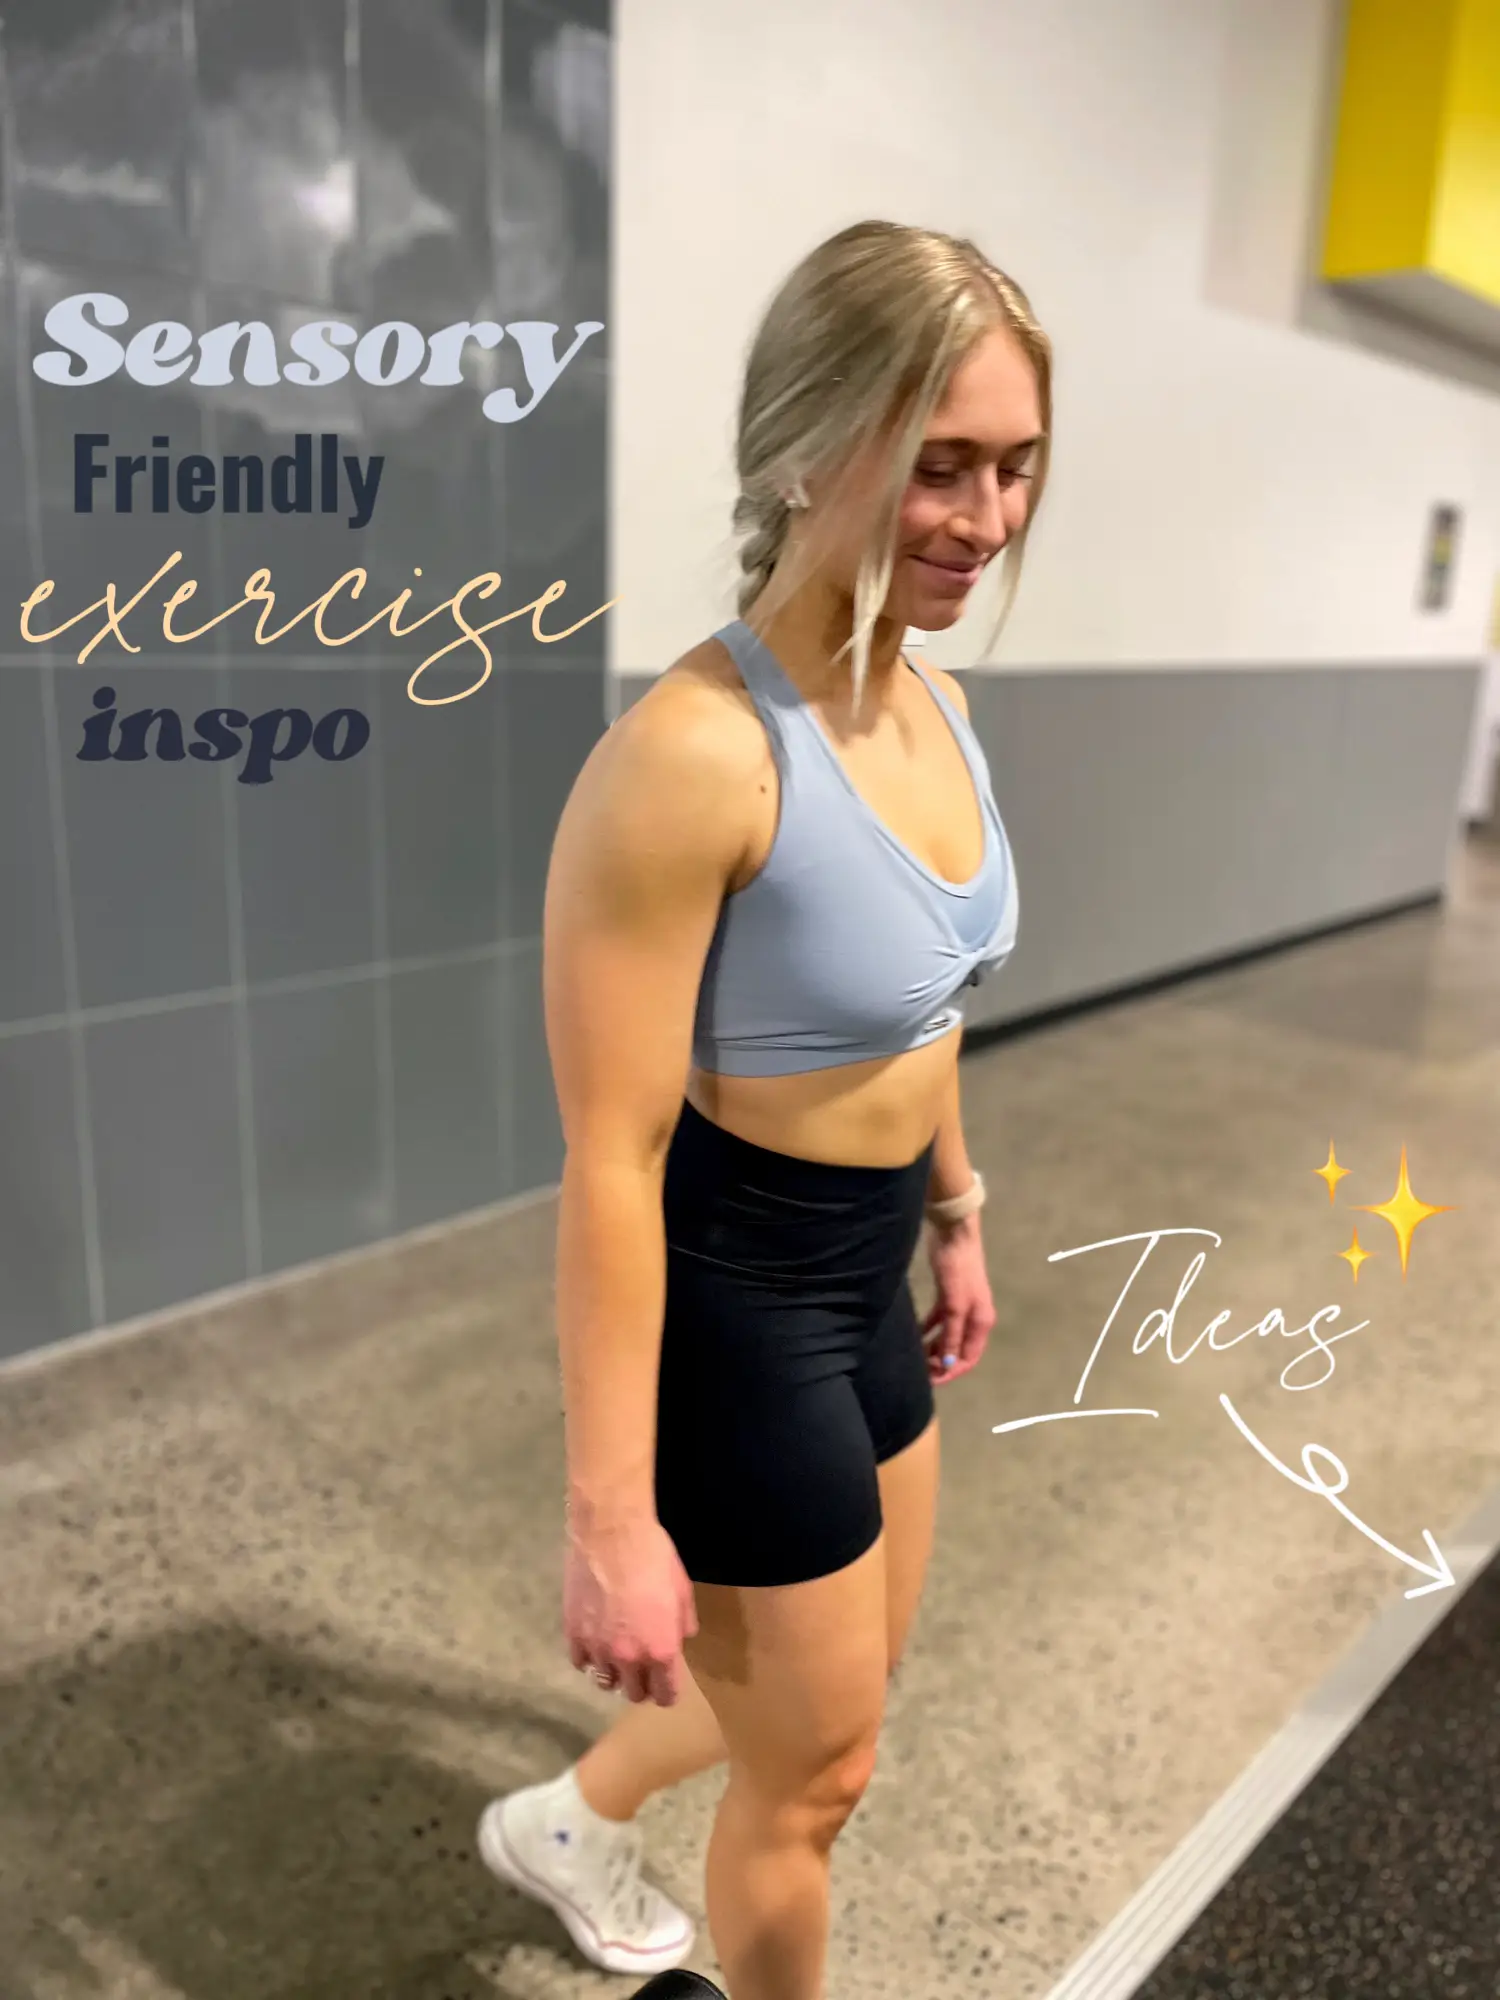 Sensory-Friendly Exercise Ideas 🧘🏼‍♀️🩰🏋🏼‍♀️, Gallery posted by Taylor  🦋